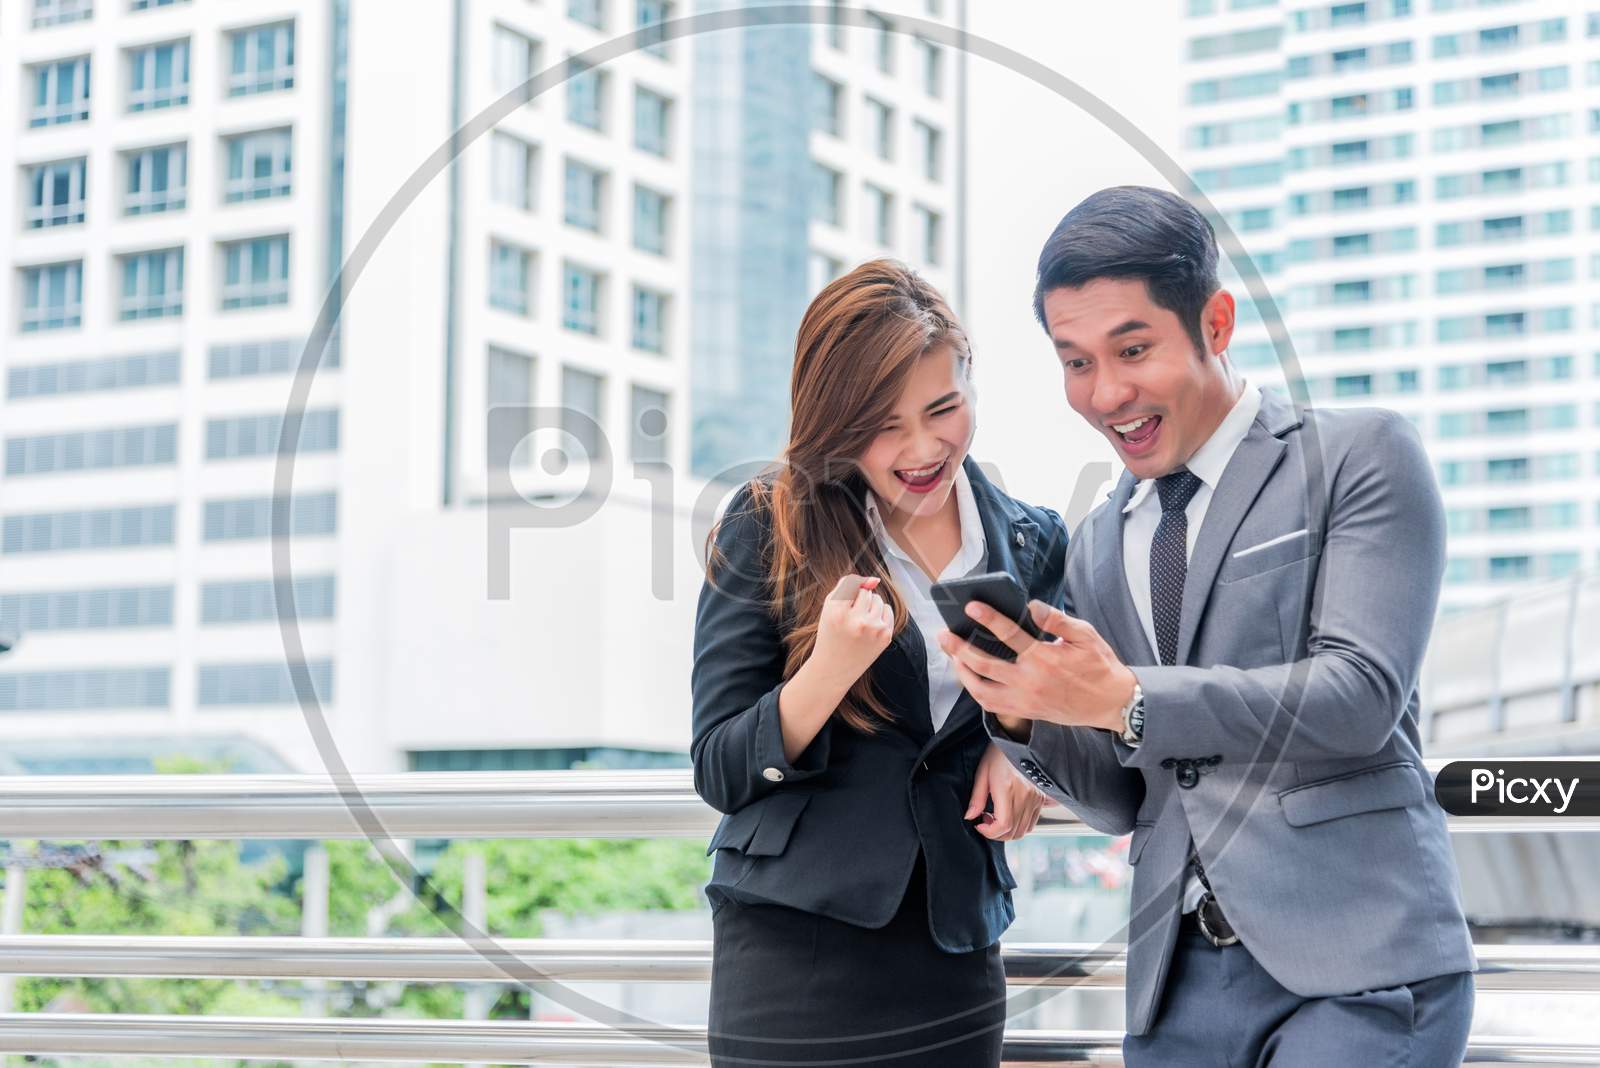 Businessman And His Secretary Are Surprising When Look At The Smartphone, Business Concept, Happiness Concept, Technology Concept.